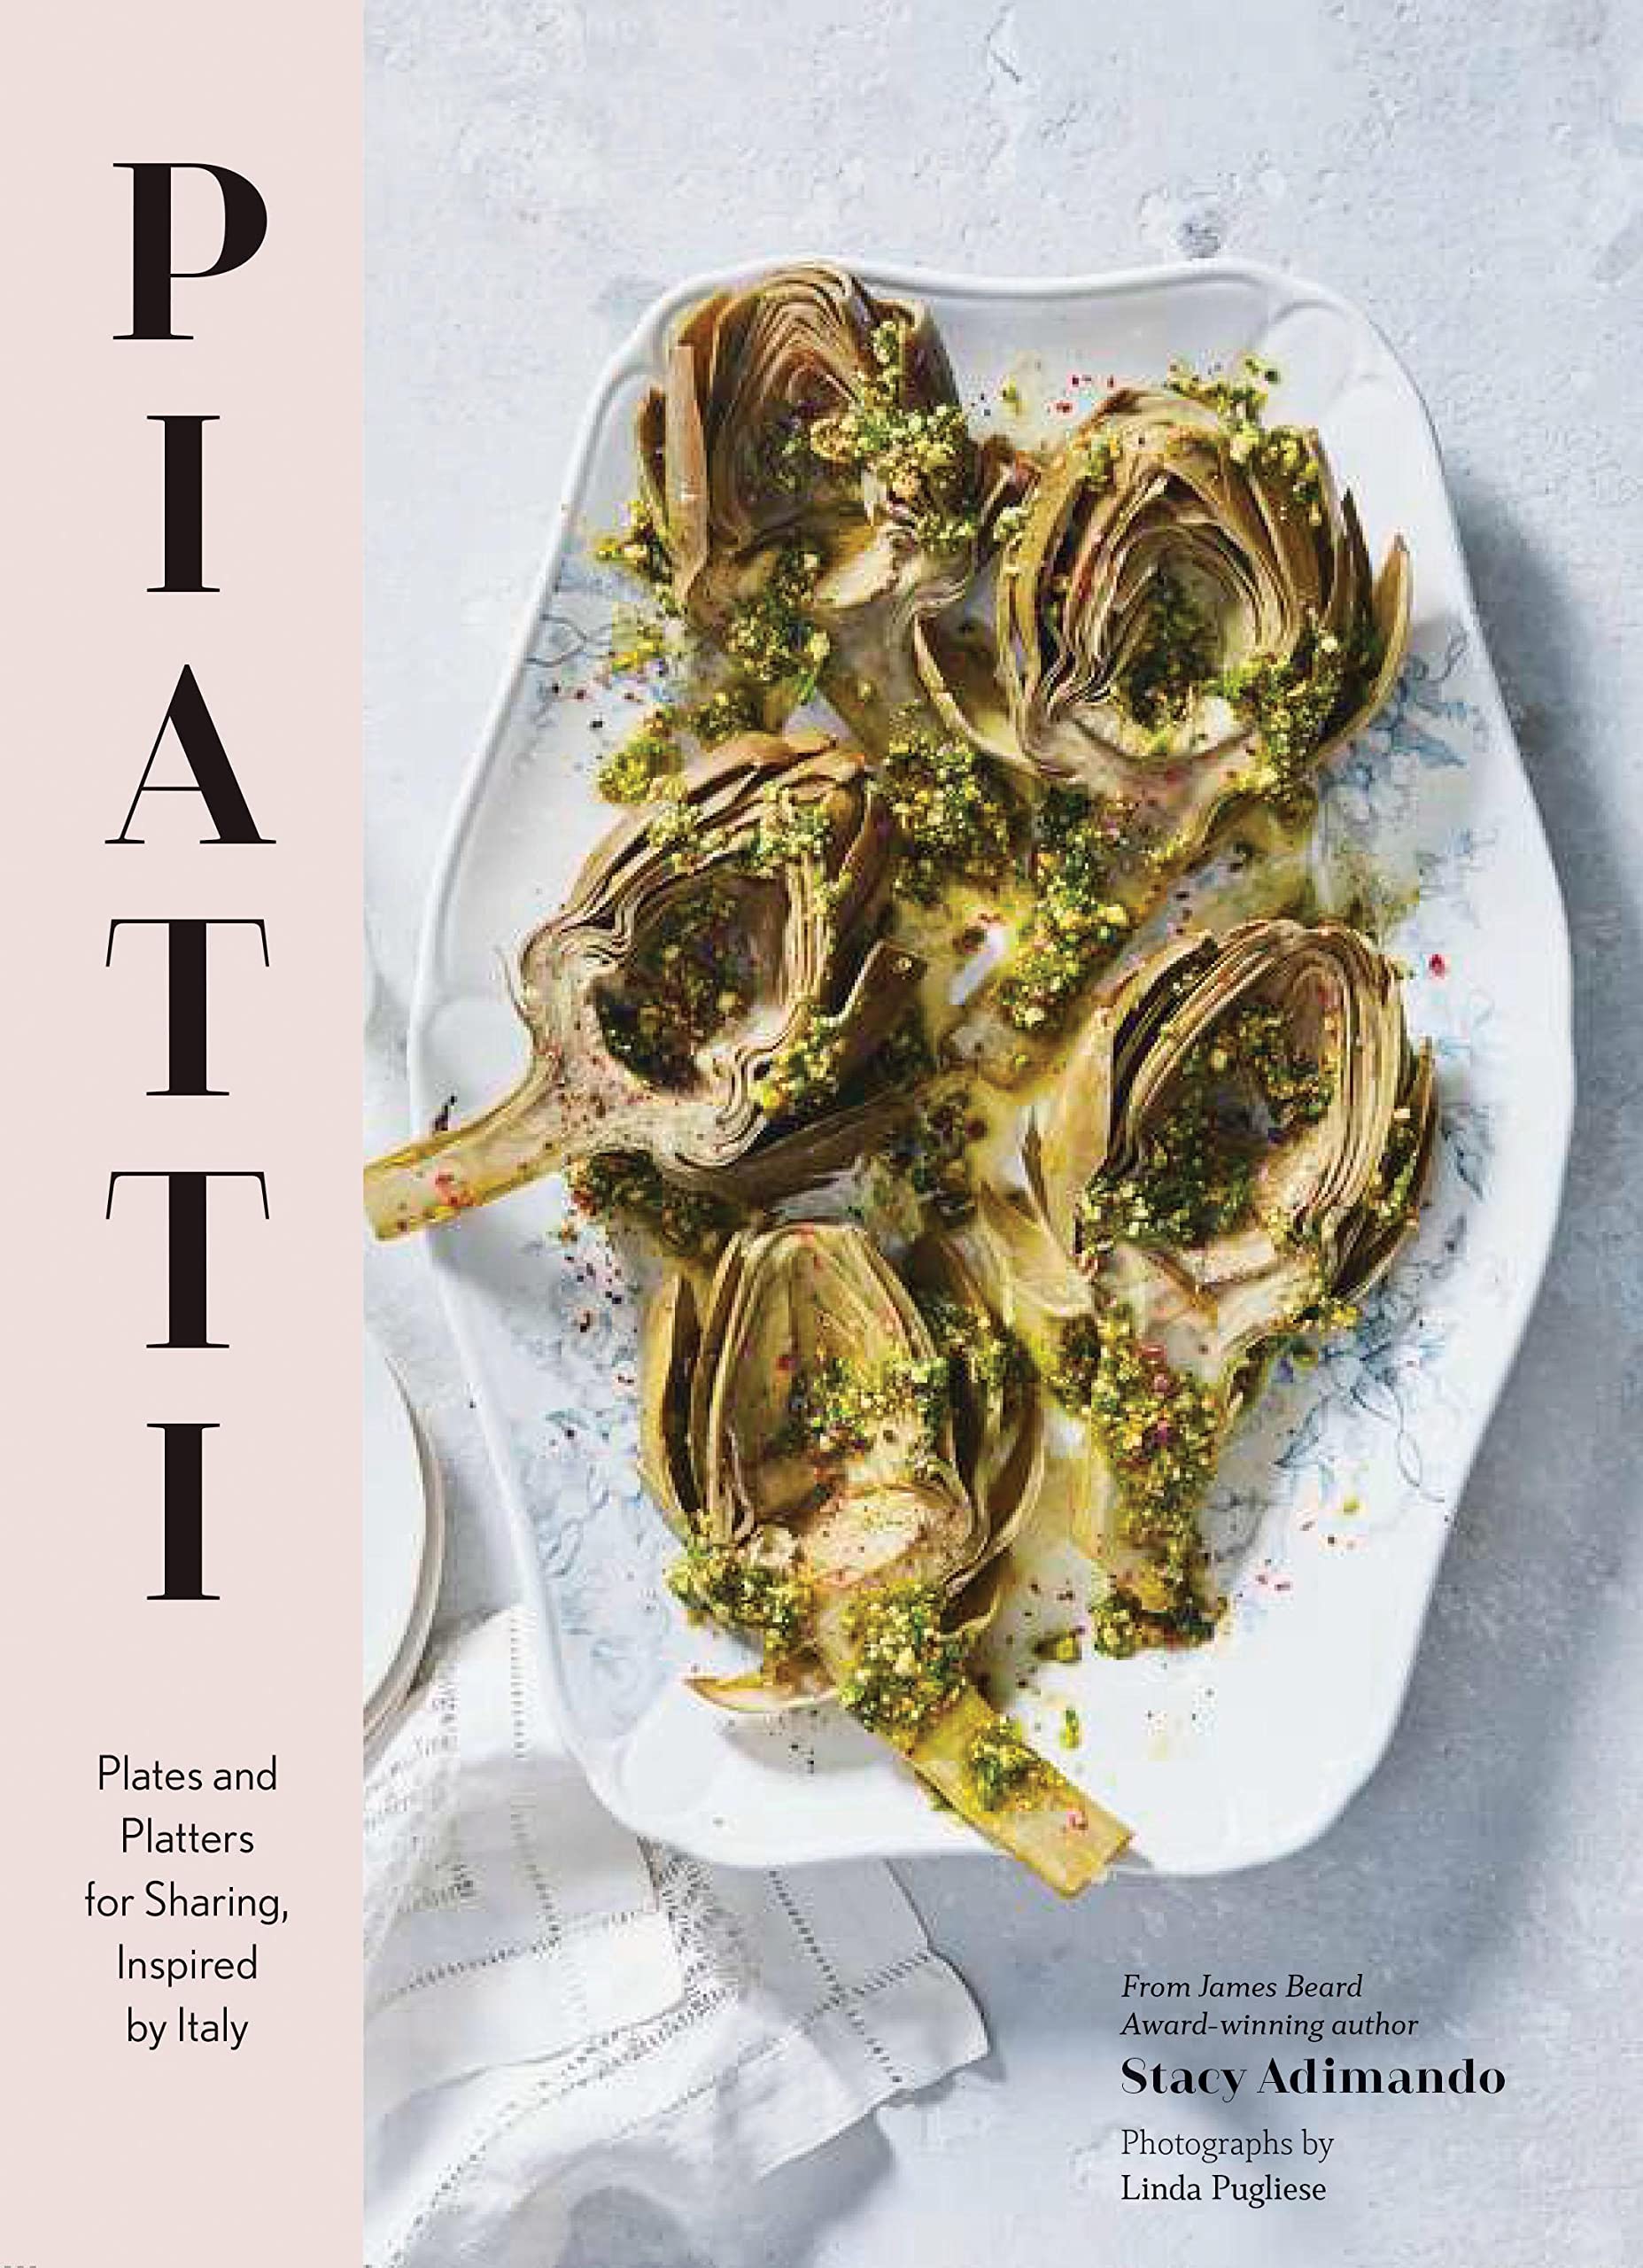 Piatti: Plates and Platters for Sharing, Inspired by Italy (Stacy Adimando)